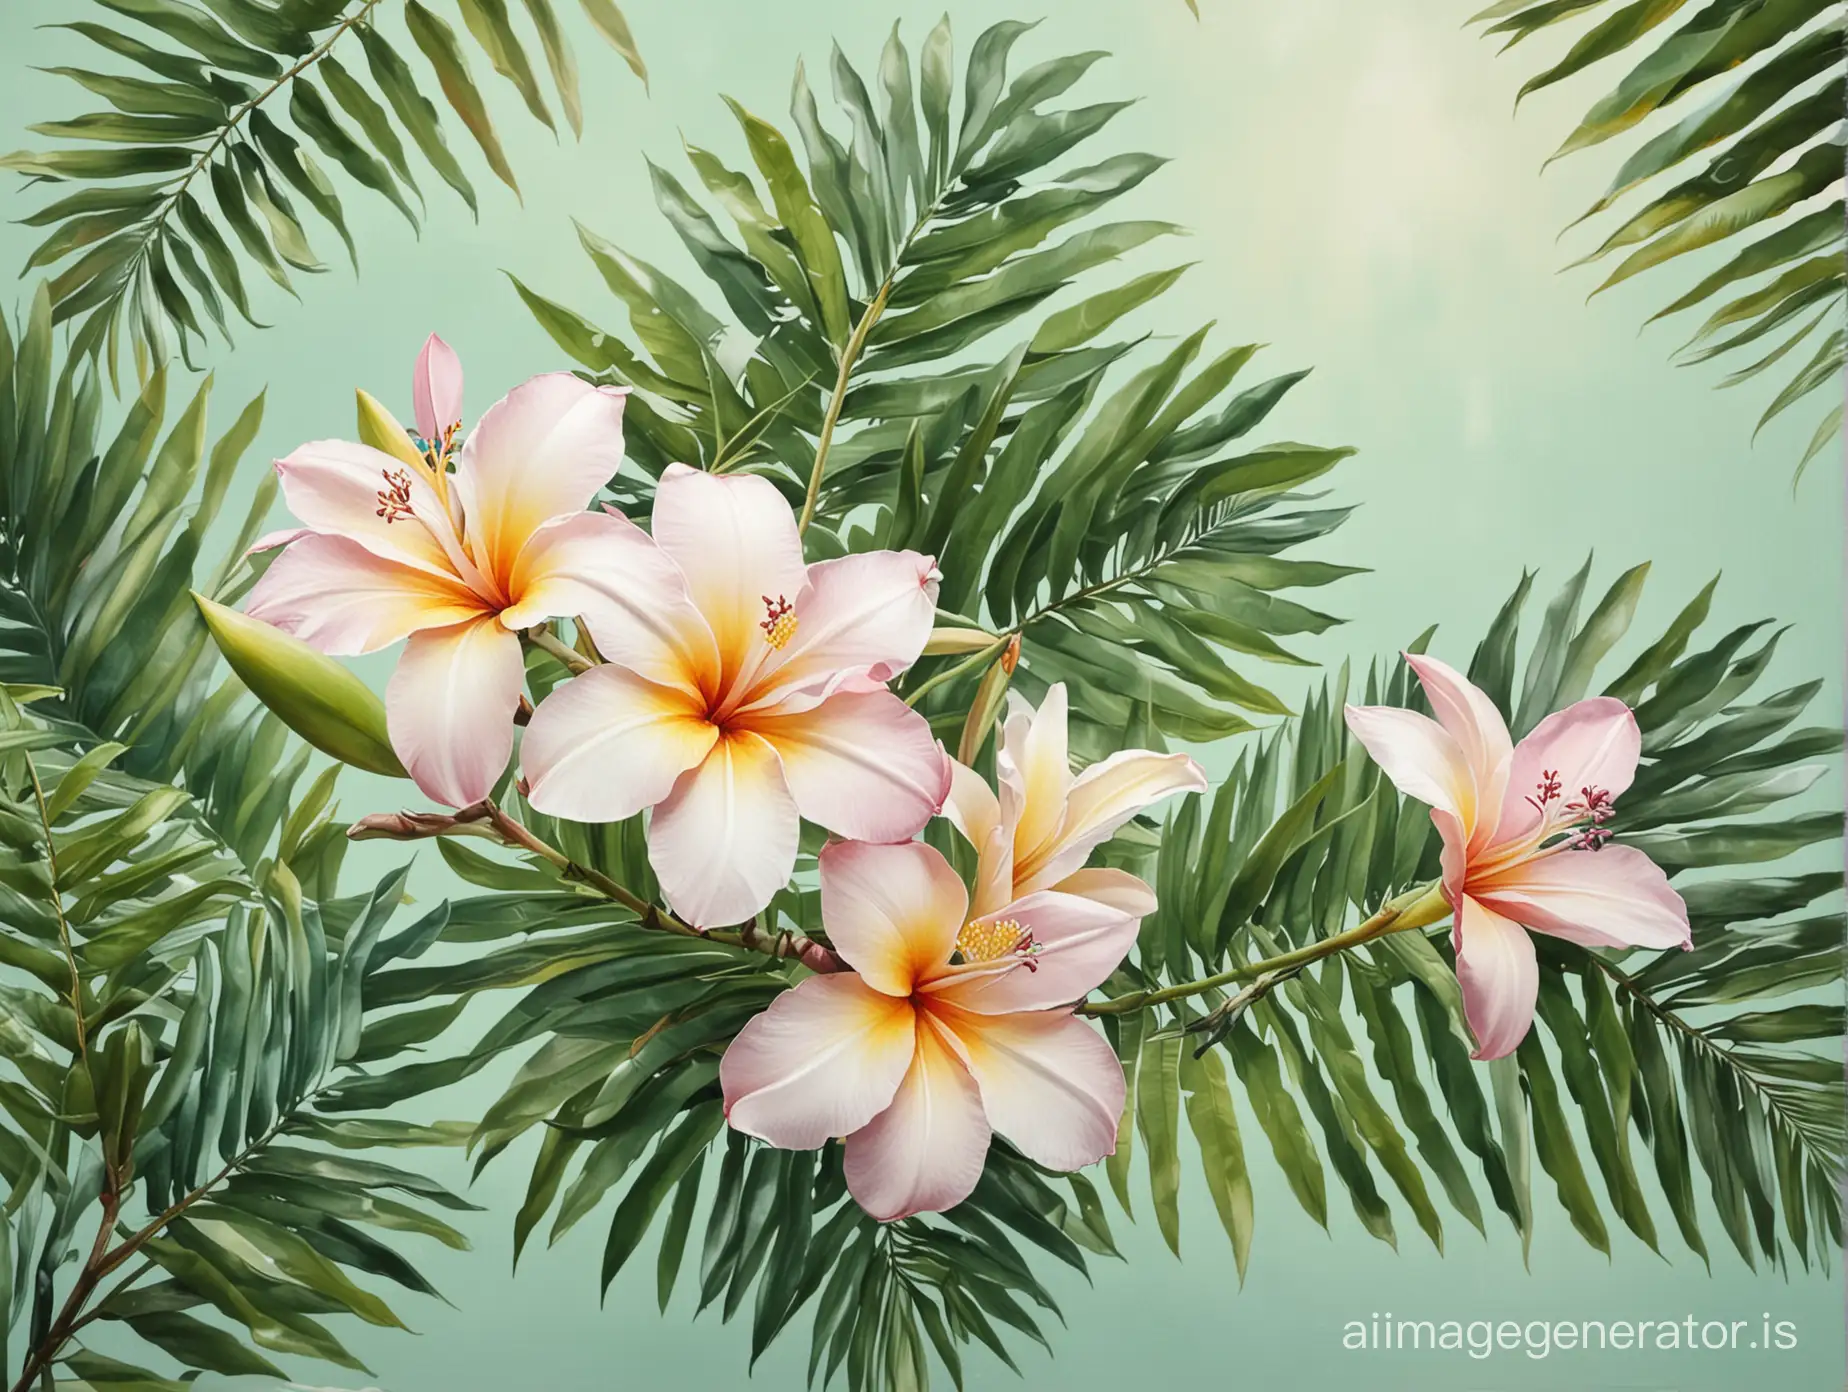 Tropical-Frangipanis-on-Elegant-Pastel-Background-with-Palms-and-Tropical-Leaves-in-Realistic-Acrylic-Style